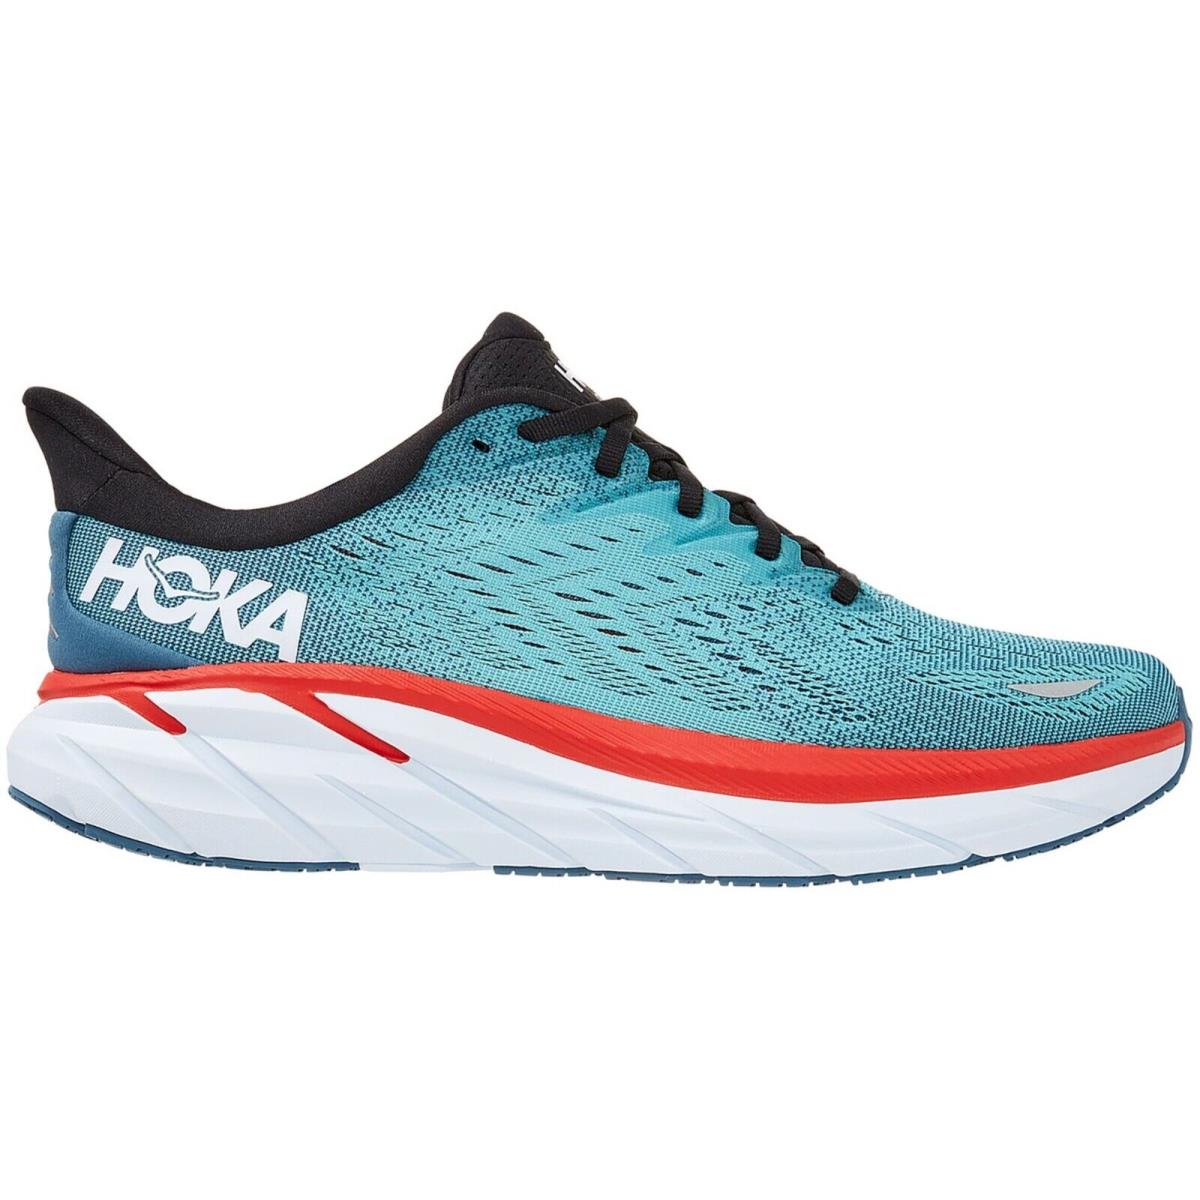 Hoka One One Clifton 8 Men`s Running Shoes Teal Red Aqua Sizes 7-15 - Blue